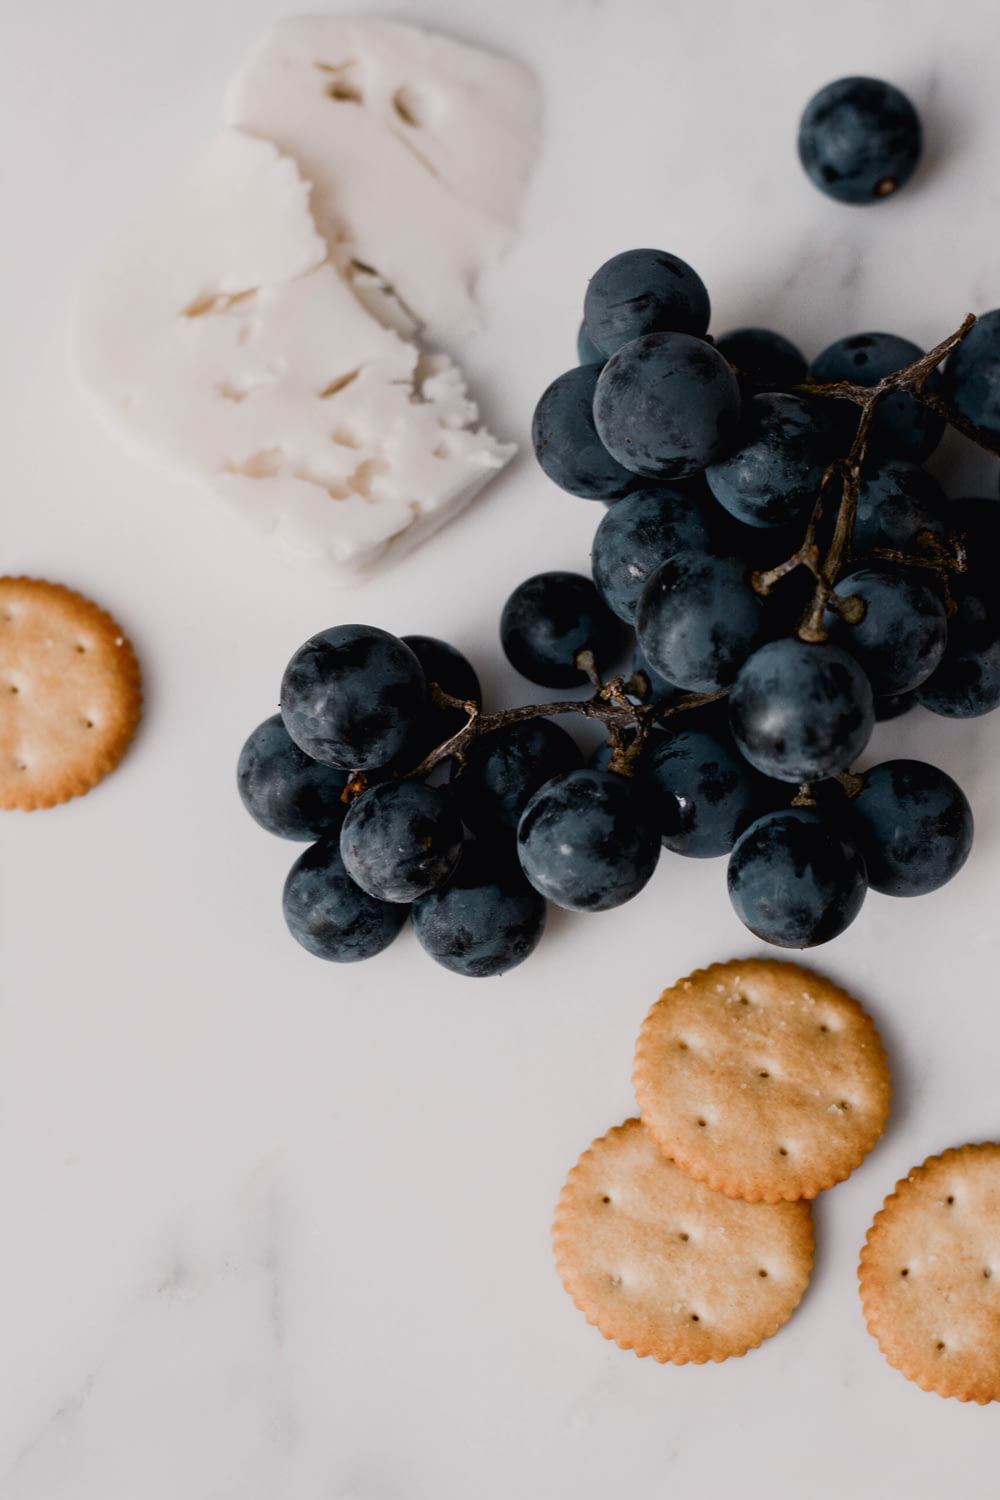 grapes, crackers and cheese on a marble surface